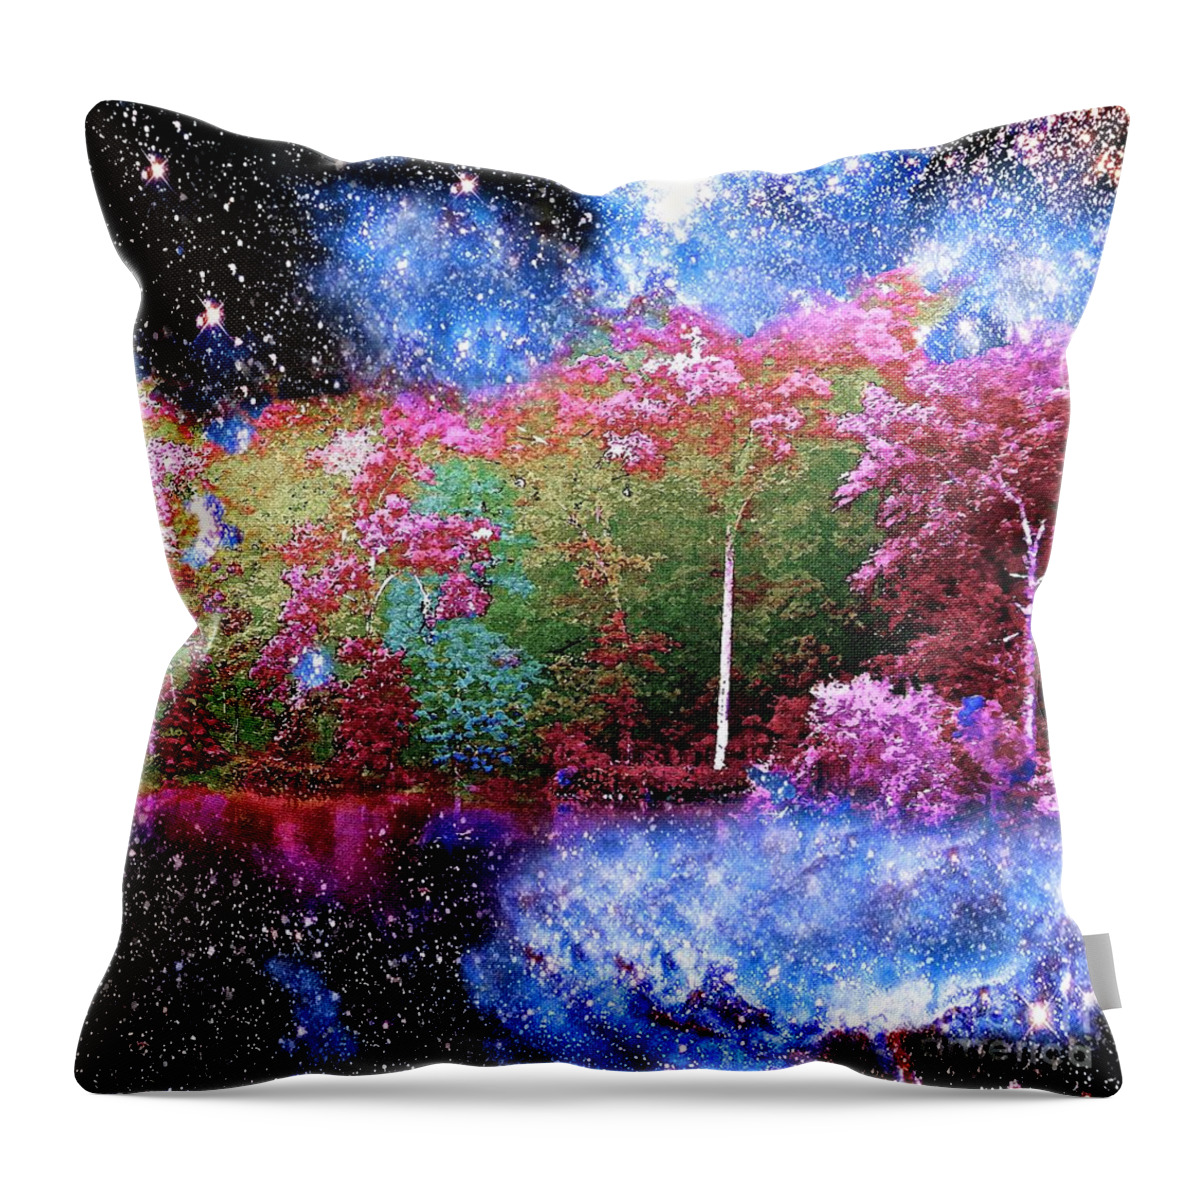 Night Throw Pillow featuring the painting Night Trees Starry Lake by Saundra Myles